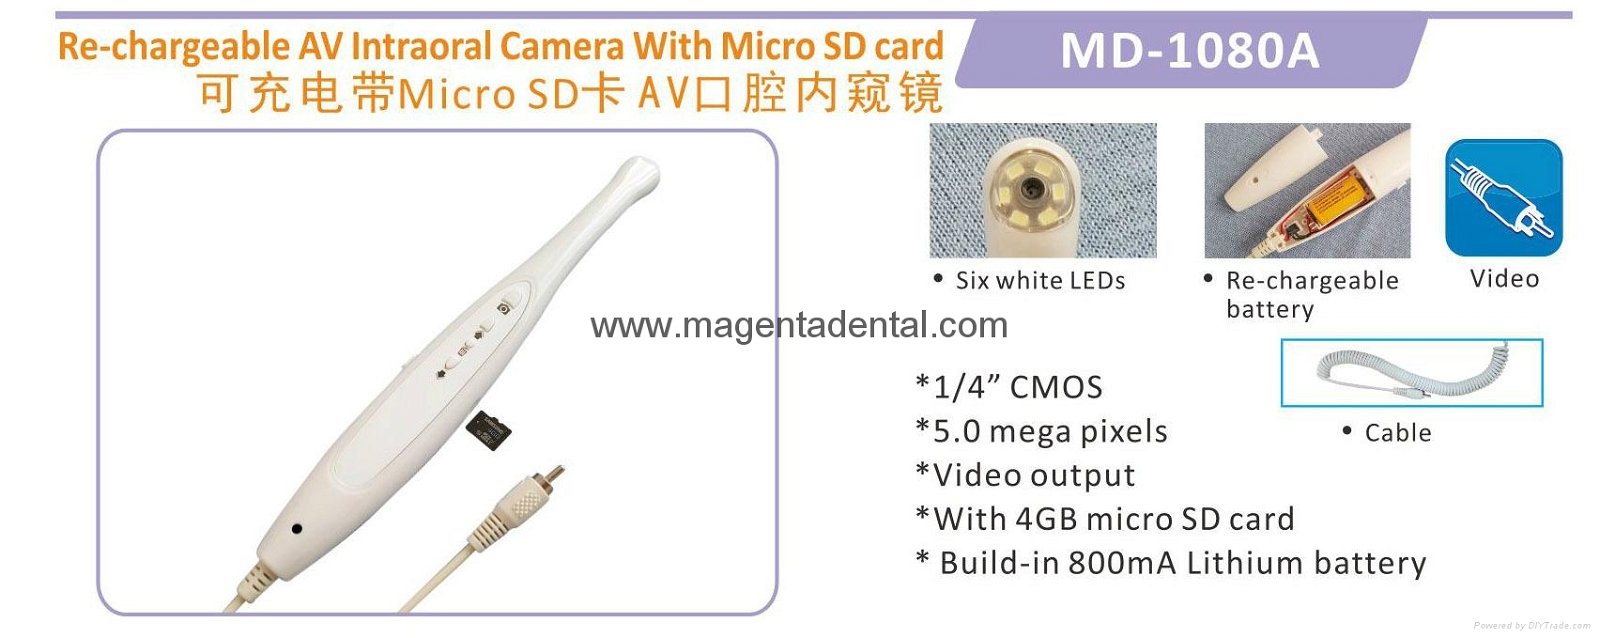 Re-chargeable Video Intra oral camera with micro SD card 2